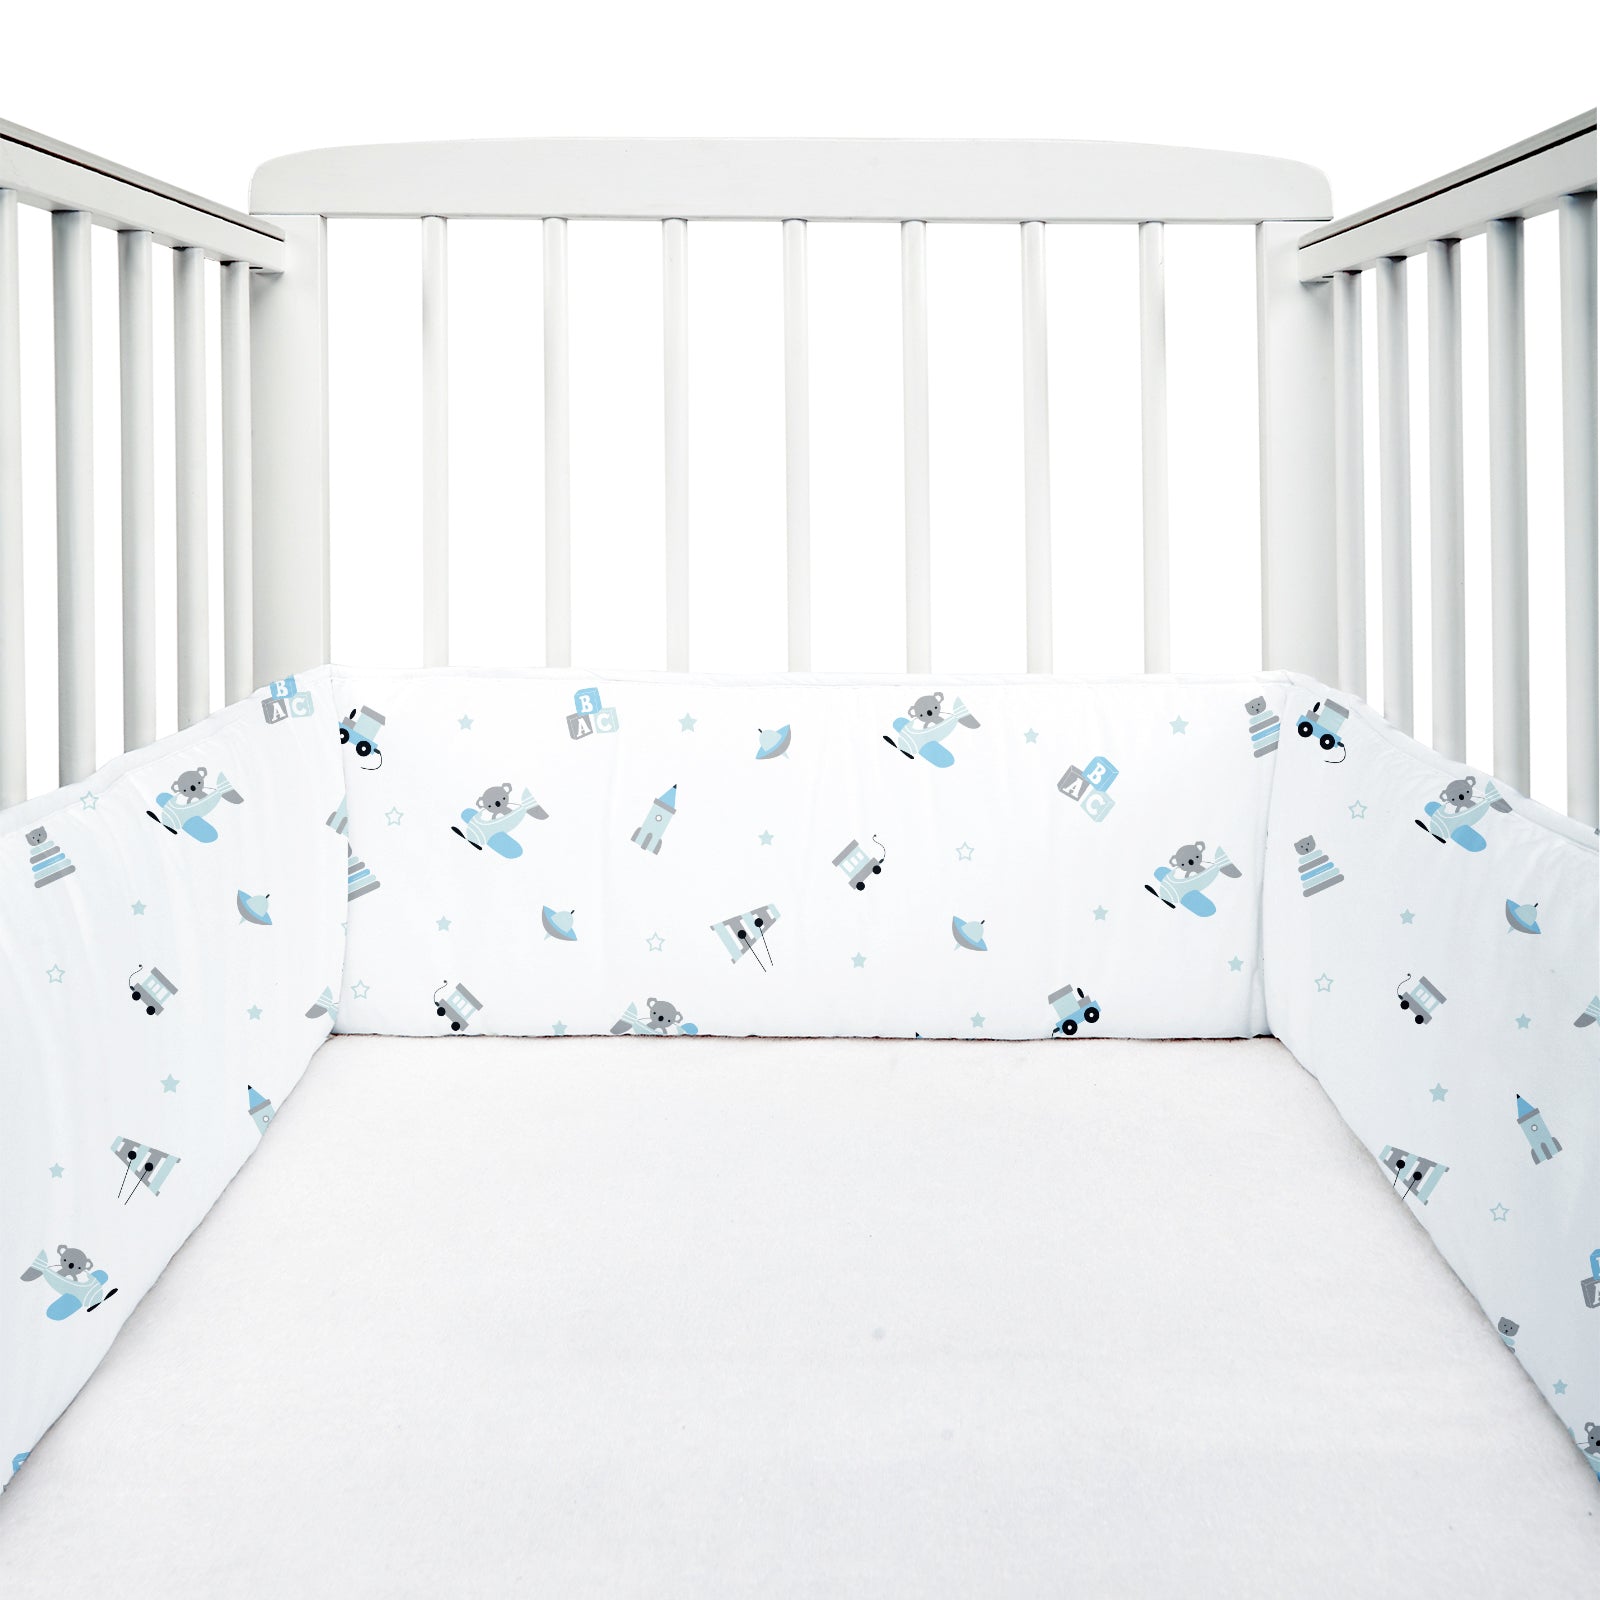 The White Cradle Baby Safe Cot Bumper Pad, Fits all Standard Cribs, Thick Padded Protective Liner for Child Nursery Bed, Soft Organic Cotton Fabric, Breathable, Non-Allergenic - Blue Koala